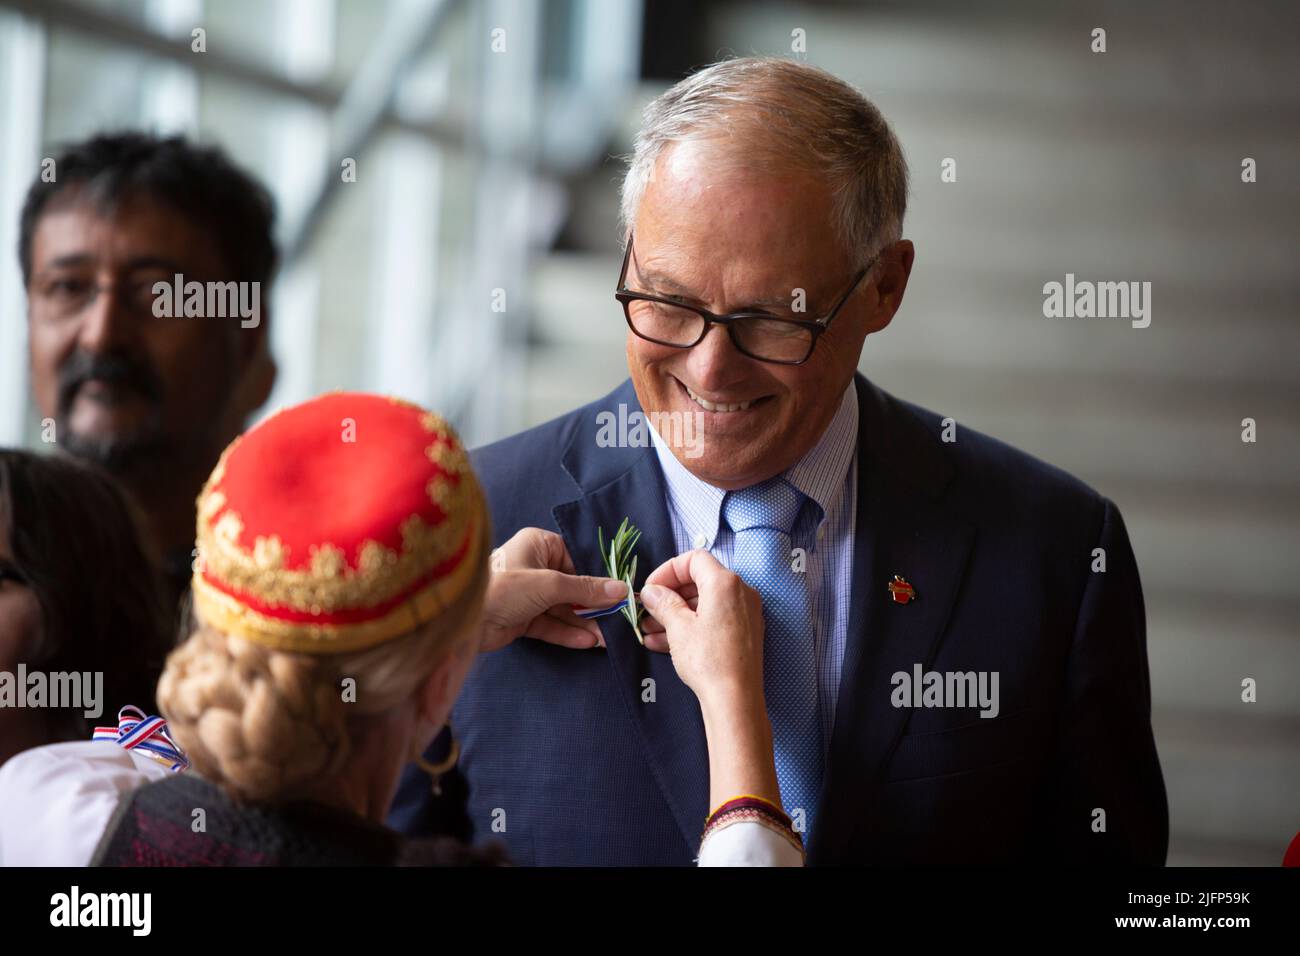 Seattle, Washington, USA. 4th July, 2022. Maria Plancich Kesovija, in traditional Croatian dress, pins a sprig of rosemary to the lapel of Washington Governor Jay Inslee during a naturalization ceremony at Fisher Pavilion. The U.S. Citizenship and Immigration Services and U.S. District Court for the Western District of Washington partnered with Seattle Center to host the annual ceremony welcoming 300 applicants from 74 countries as new citizens. Credit: Paul Christian Gordon/Alamy Live News Stock Photo